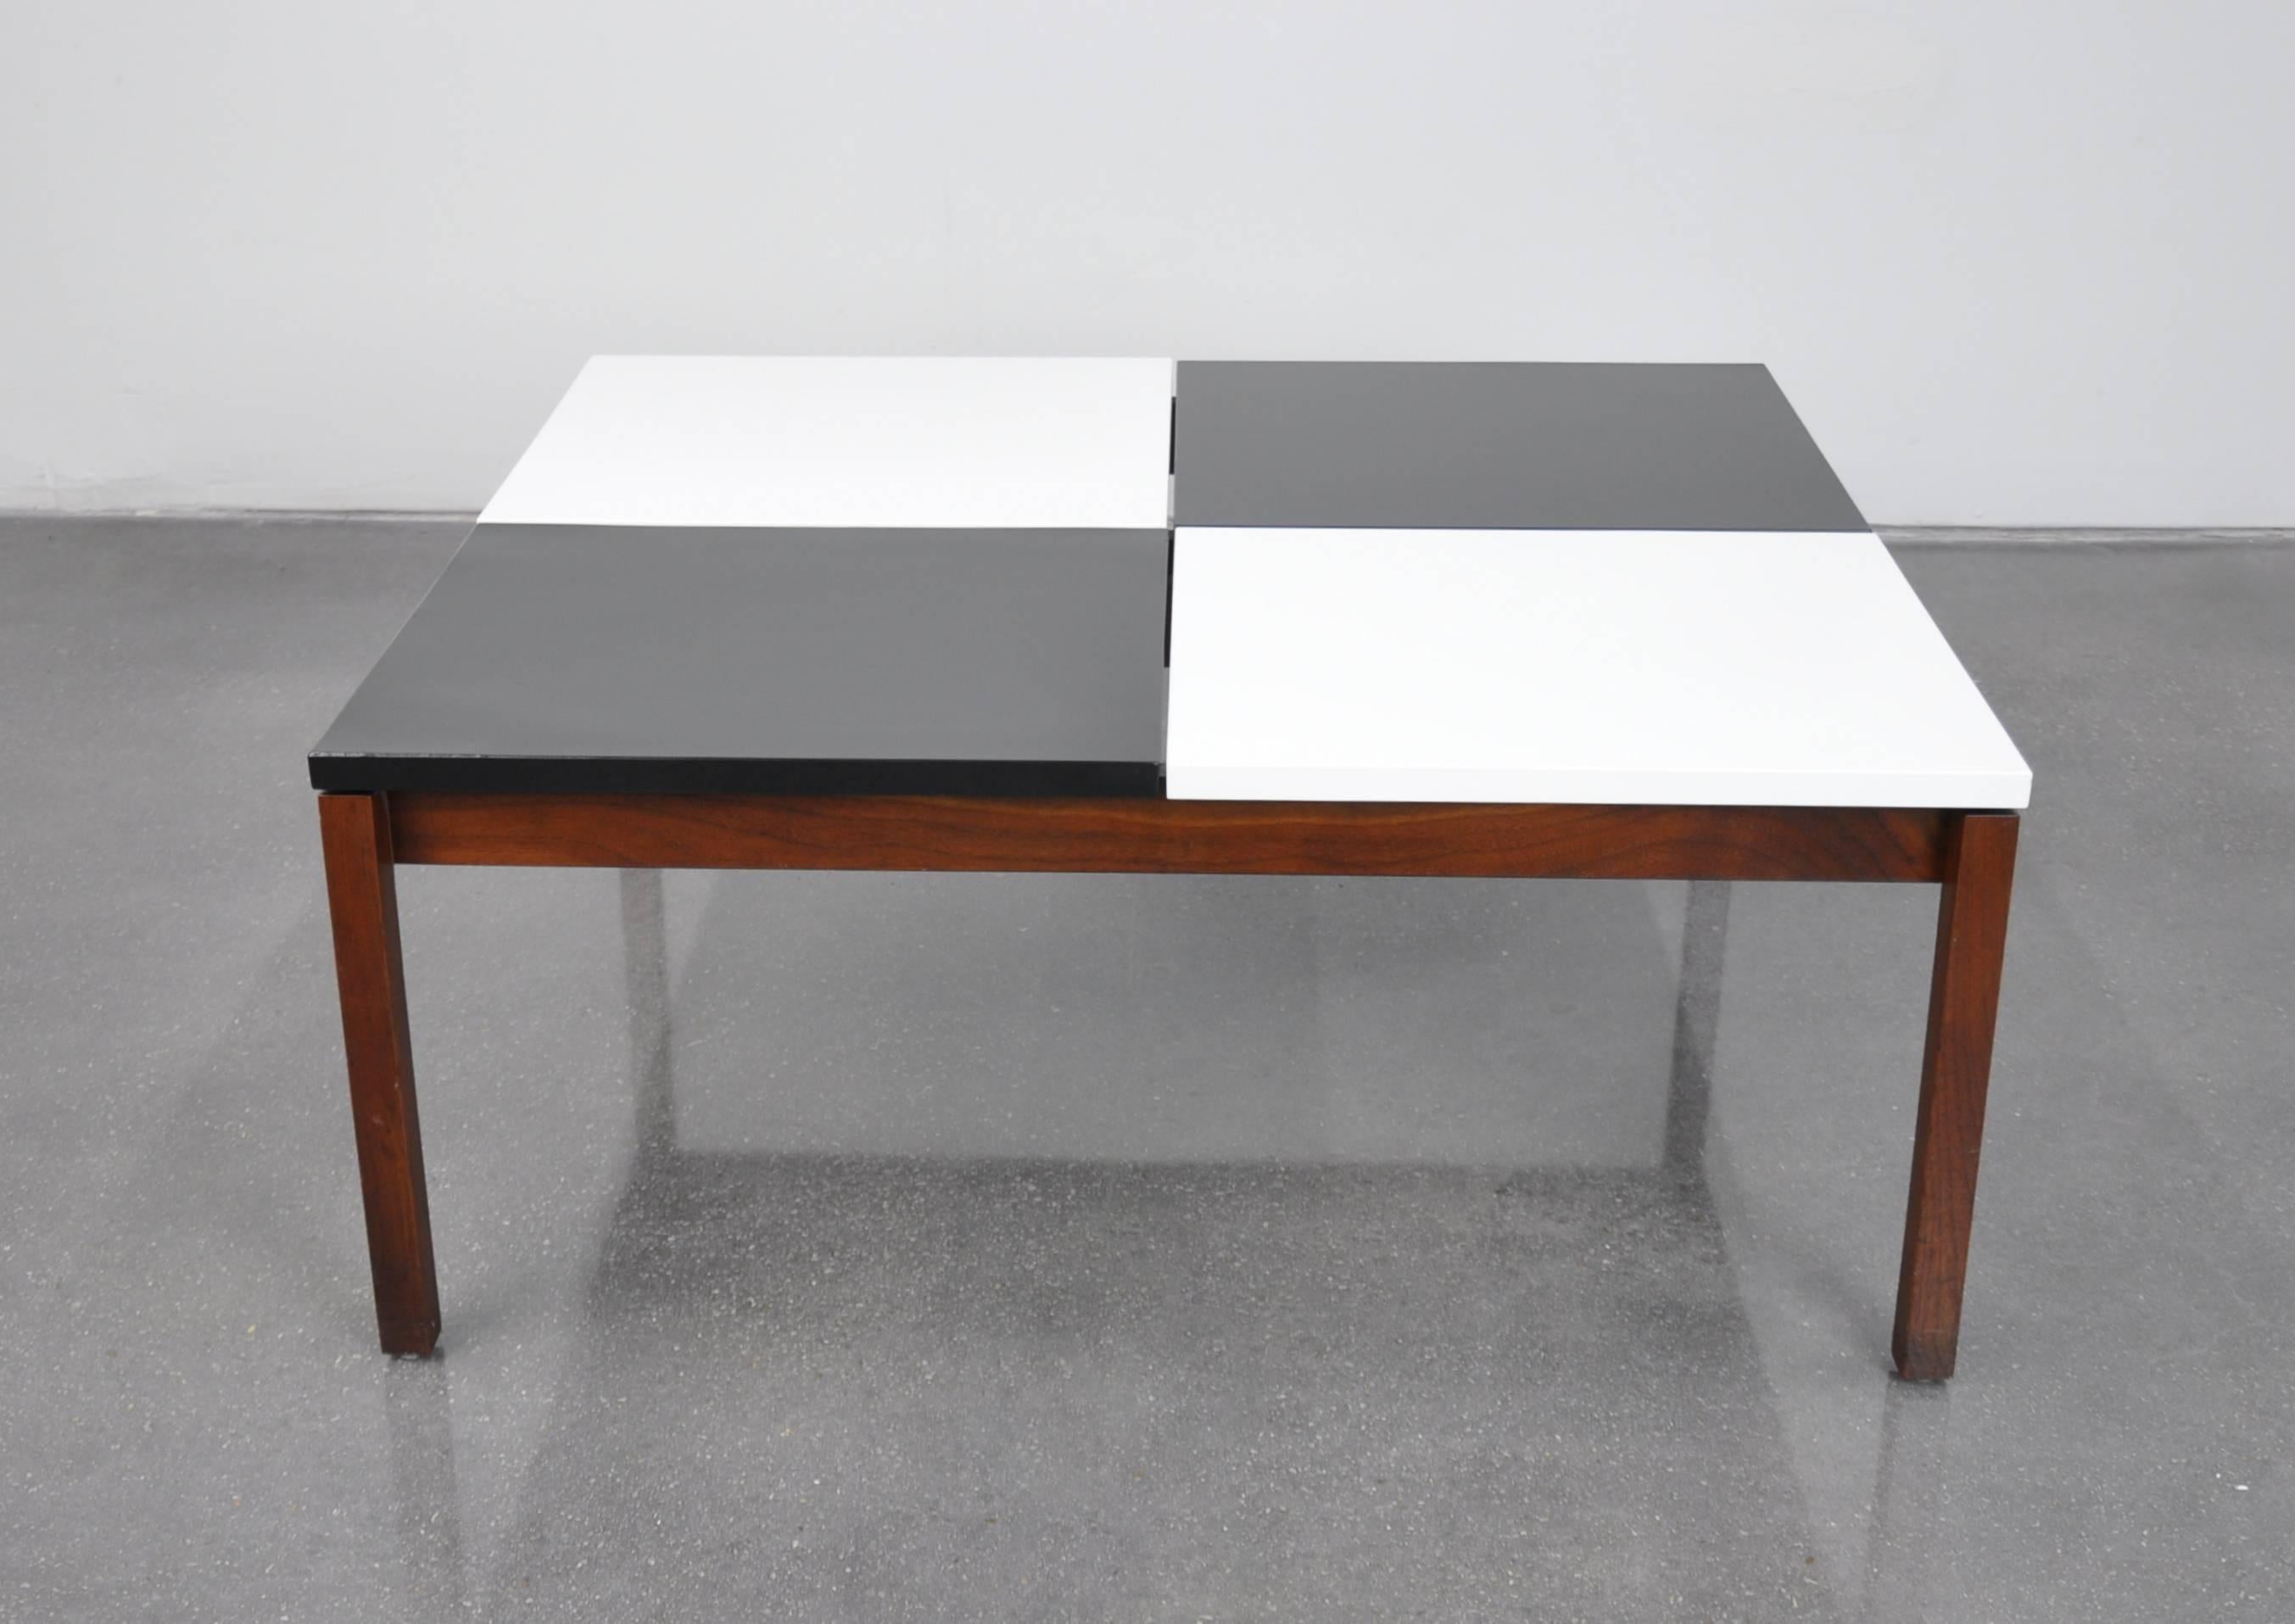 An early example of the Mid-Century Modern Model 350 cocktail table designed by Lewis Butler for Knoll in 1953. The vintage table features a black and white checkered top floating over a walnut frame. Like many of Florence Knoll’s early pieces, the